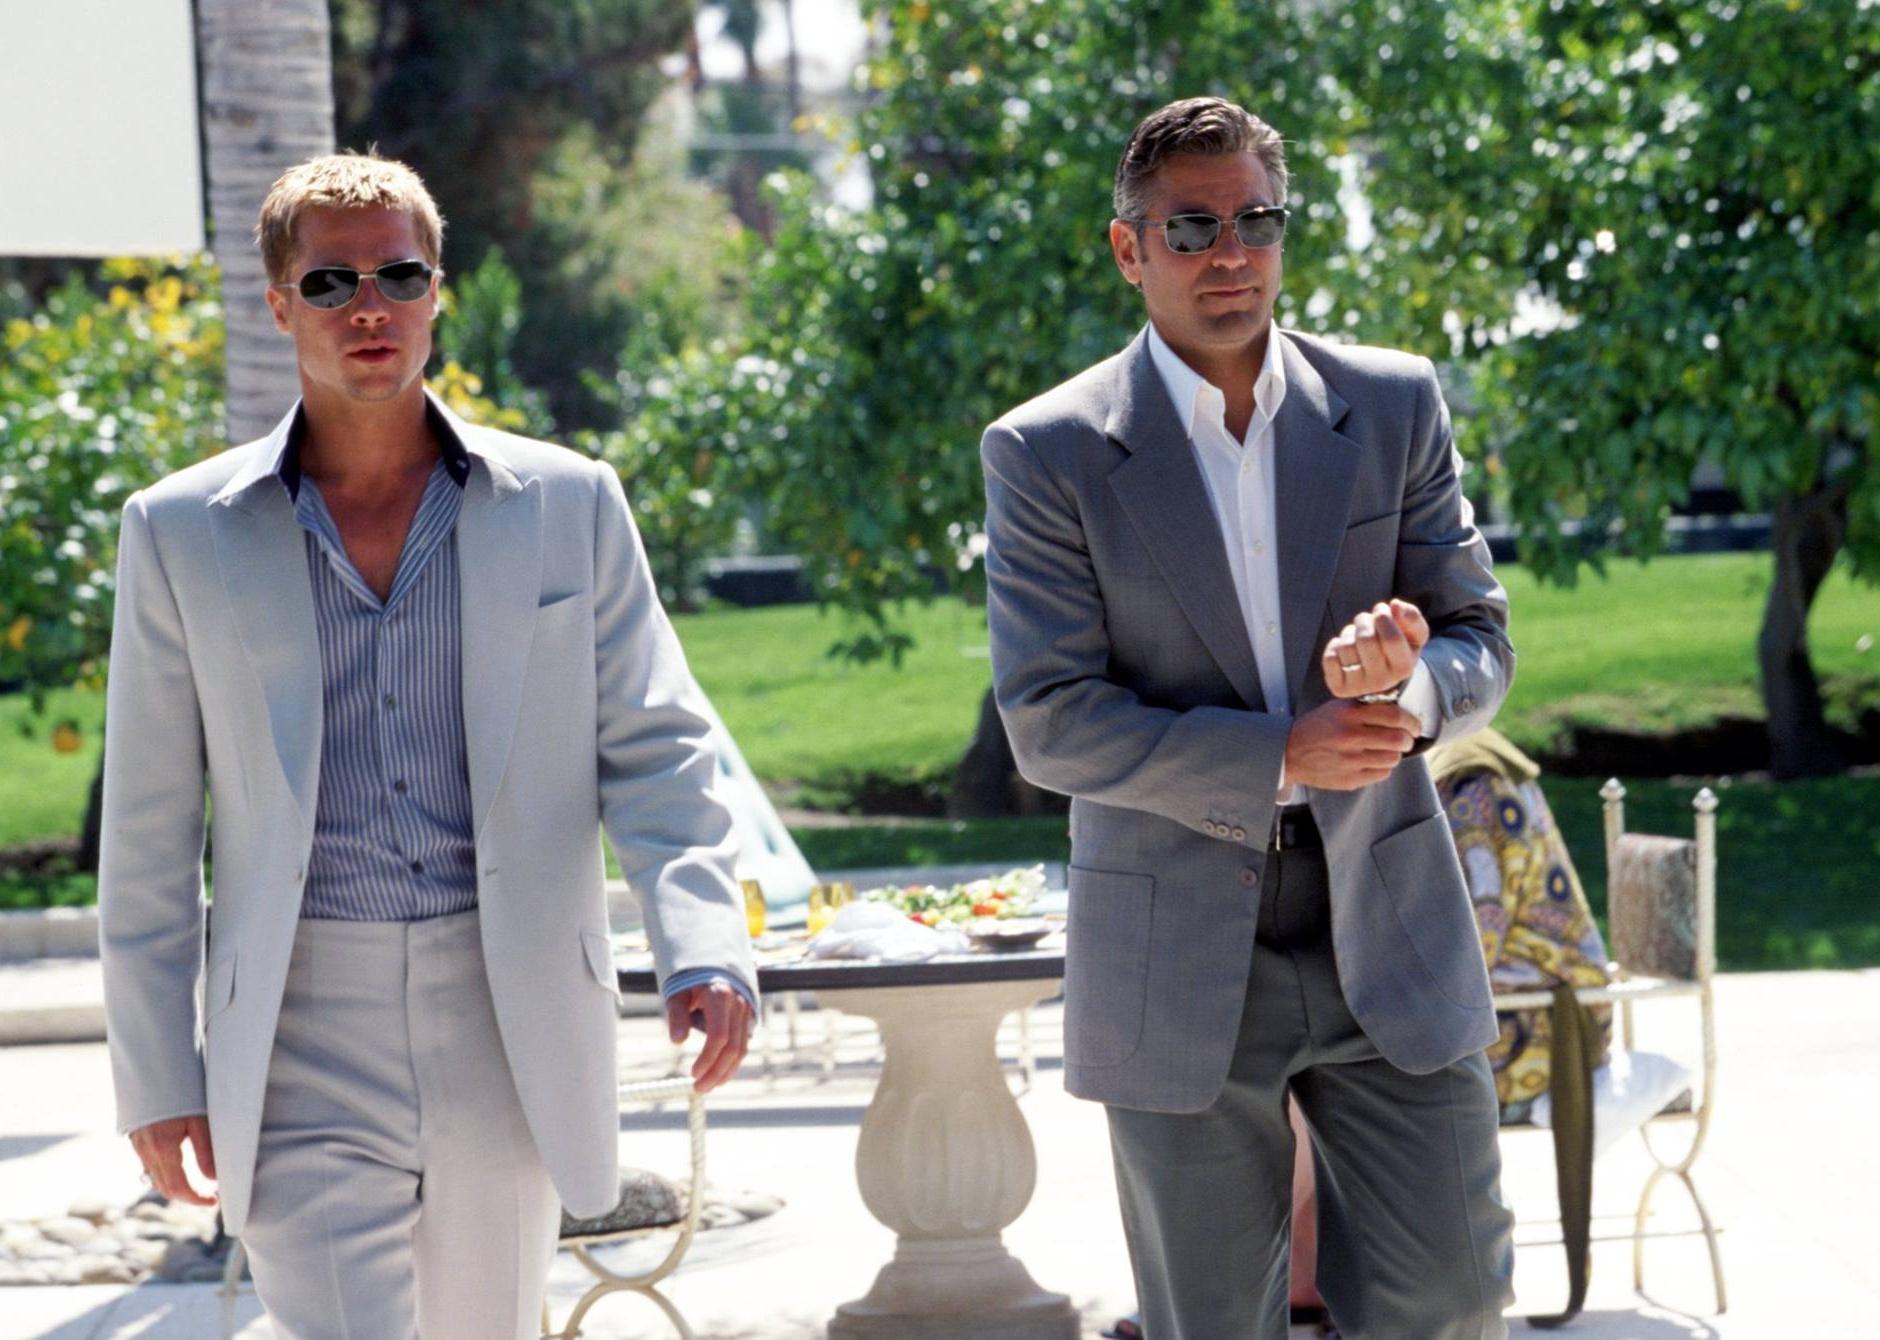 Brad Pitt and George Clooney walking in suits.